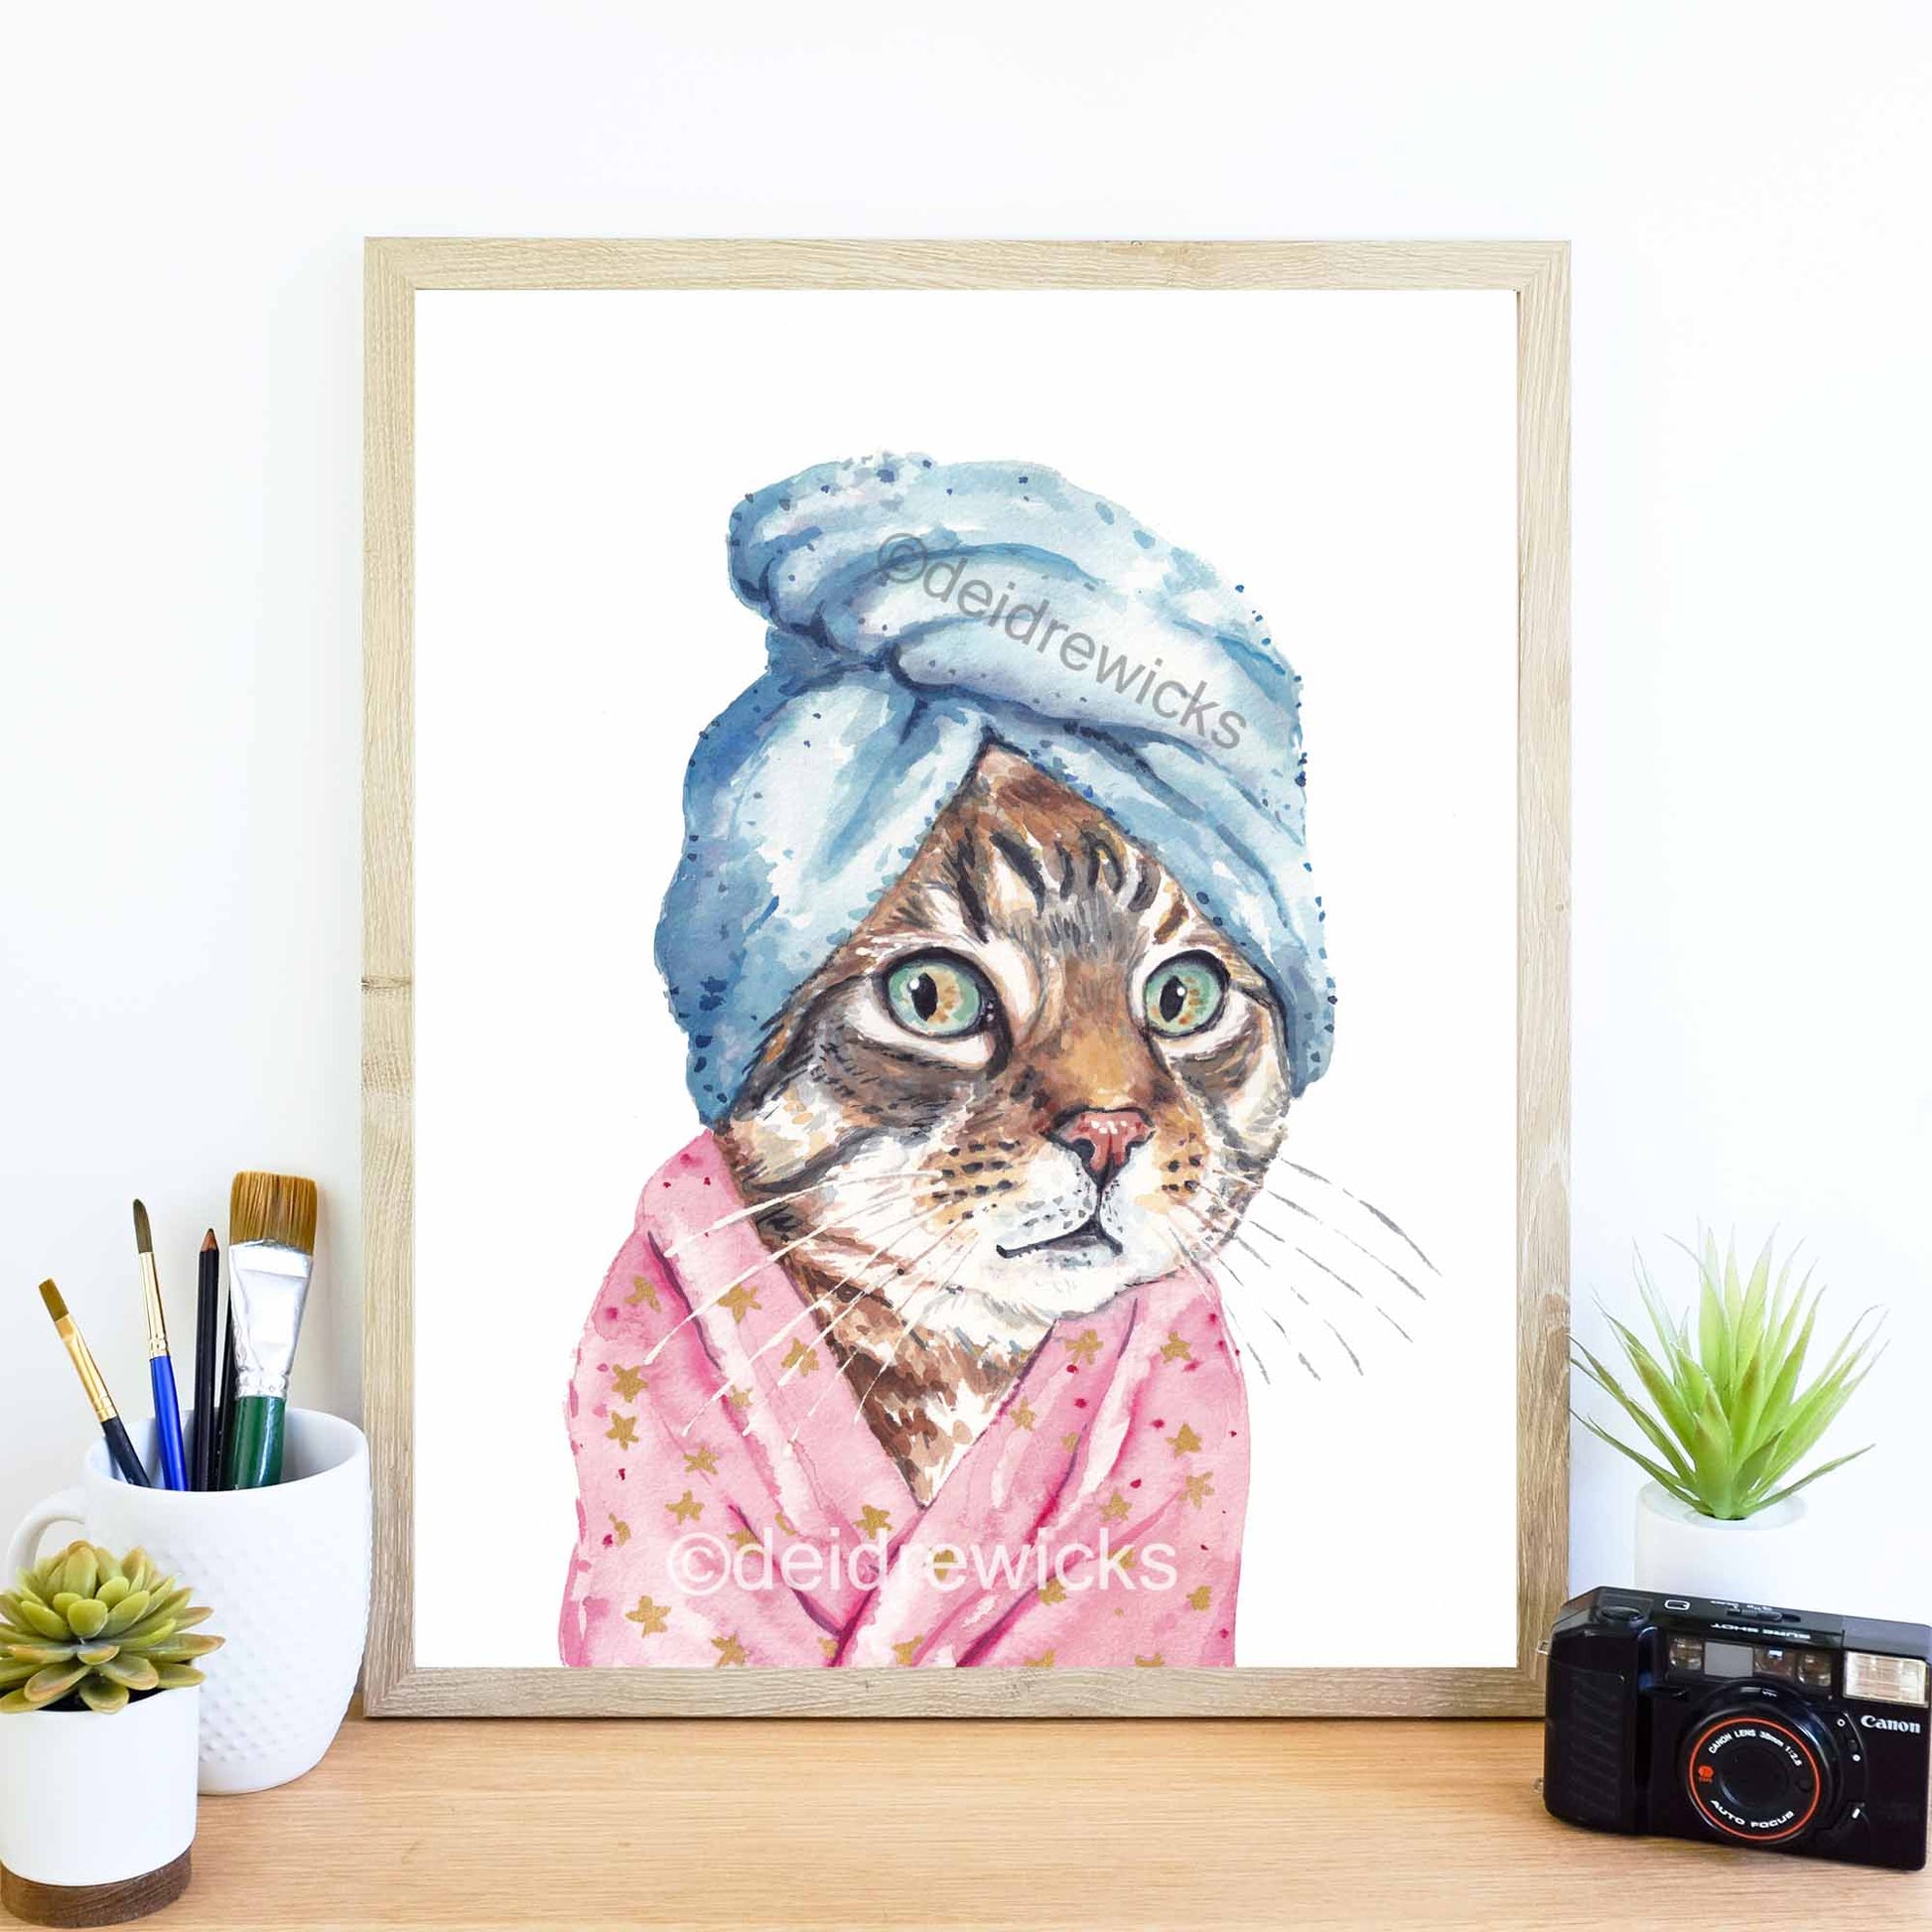 Framed example of a tabby cat watercolour painting by Deidre Wicks. Perfect for a bedroom or bathroom